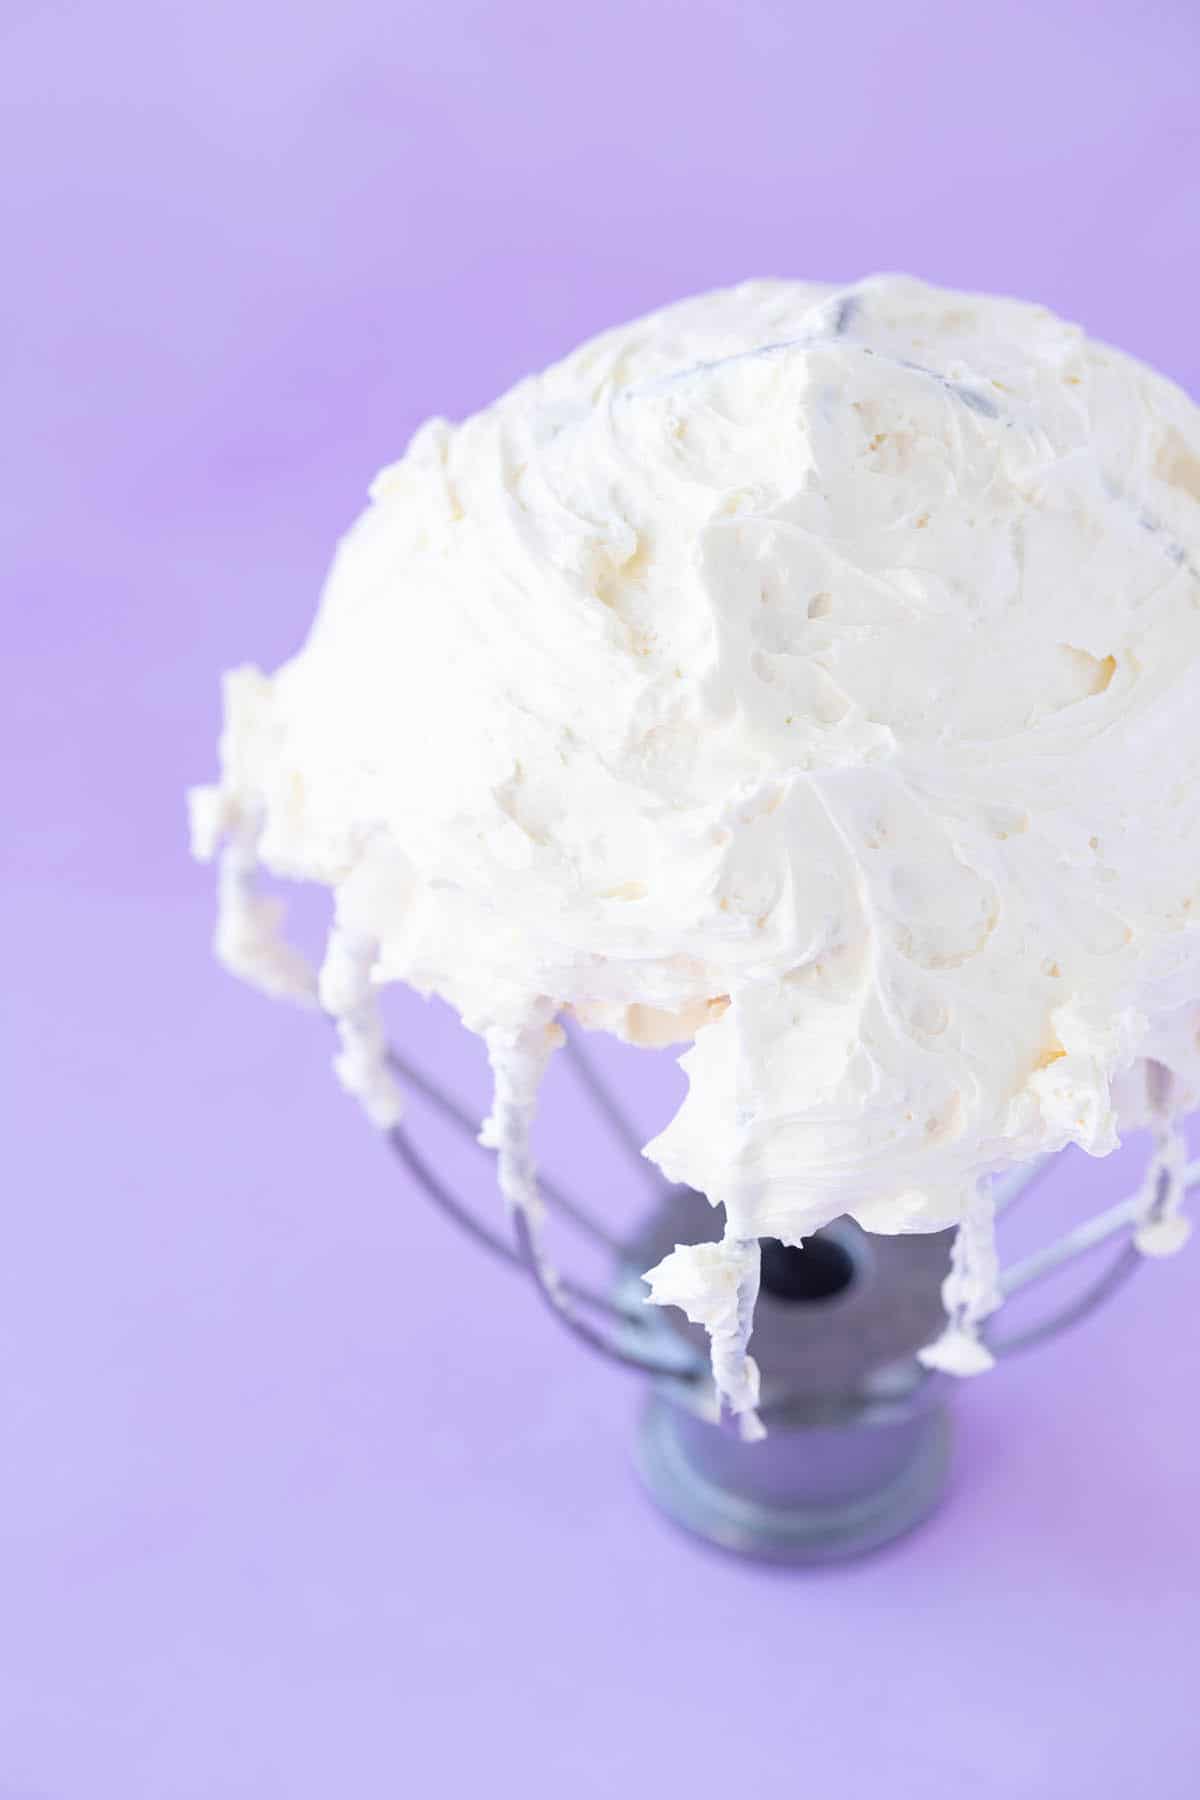 Close up shot of homemade Swiss Meringue Buttercream frosting on a purple background.